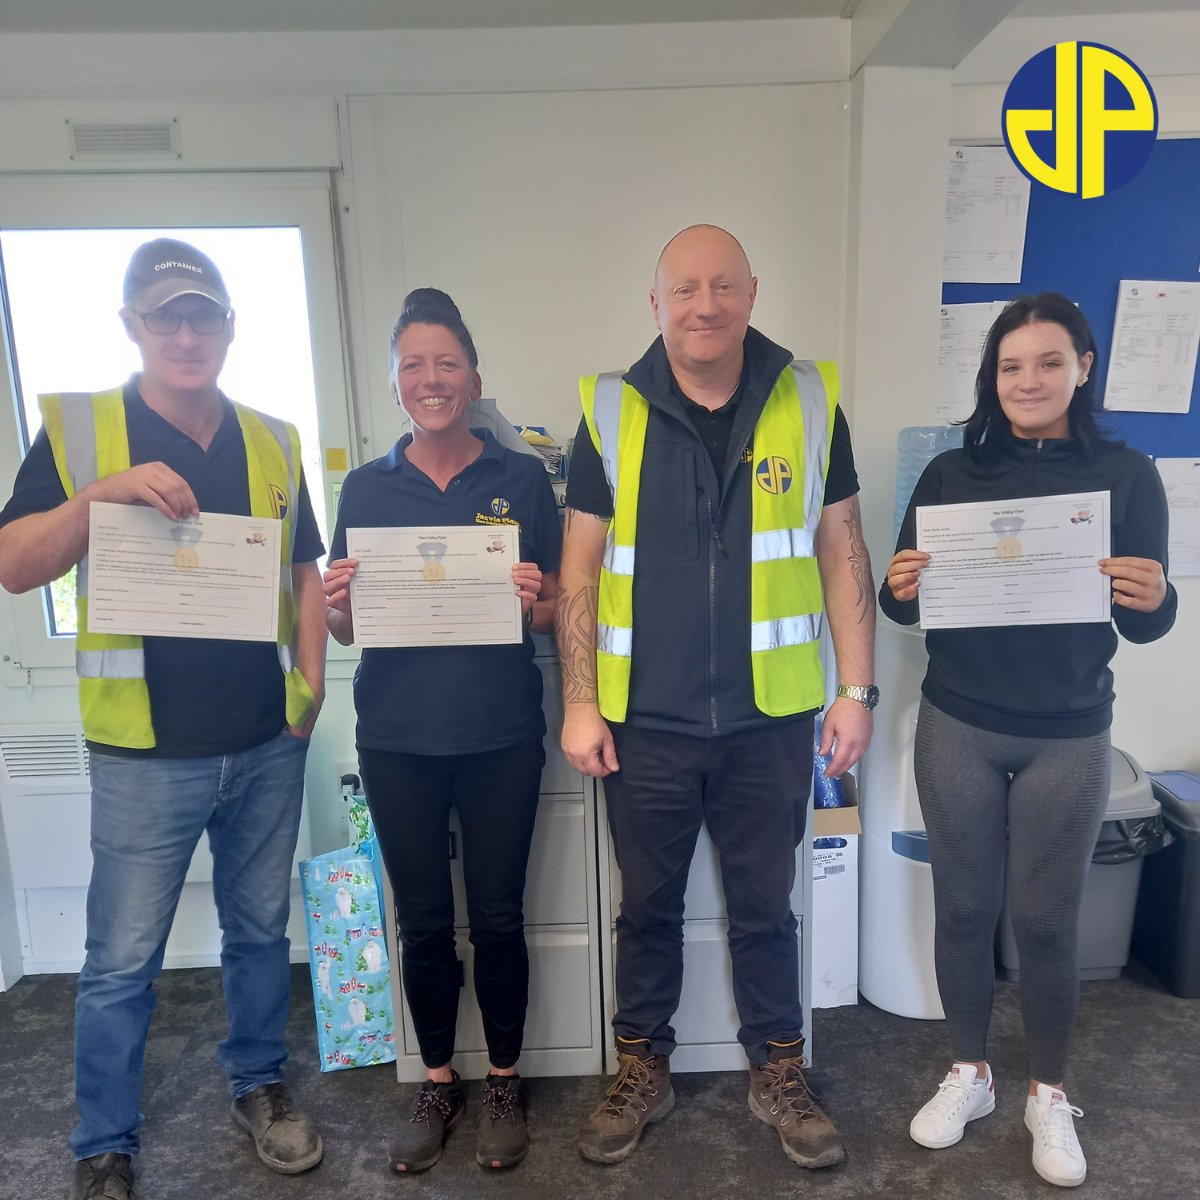 JARVIE PLANT TEAM SPOTLIGHT 🎉 

We're delighted to congratulate more of our team who have completed their Modern Apprenticeships SCQF Level 6 Business & Administration, resulting in them all winning an Employee Recognition Award. 👏 

#JarviePlant #ModernApprenticeship